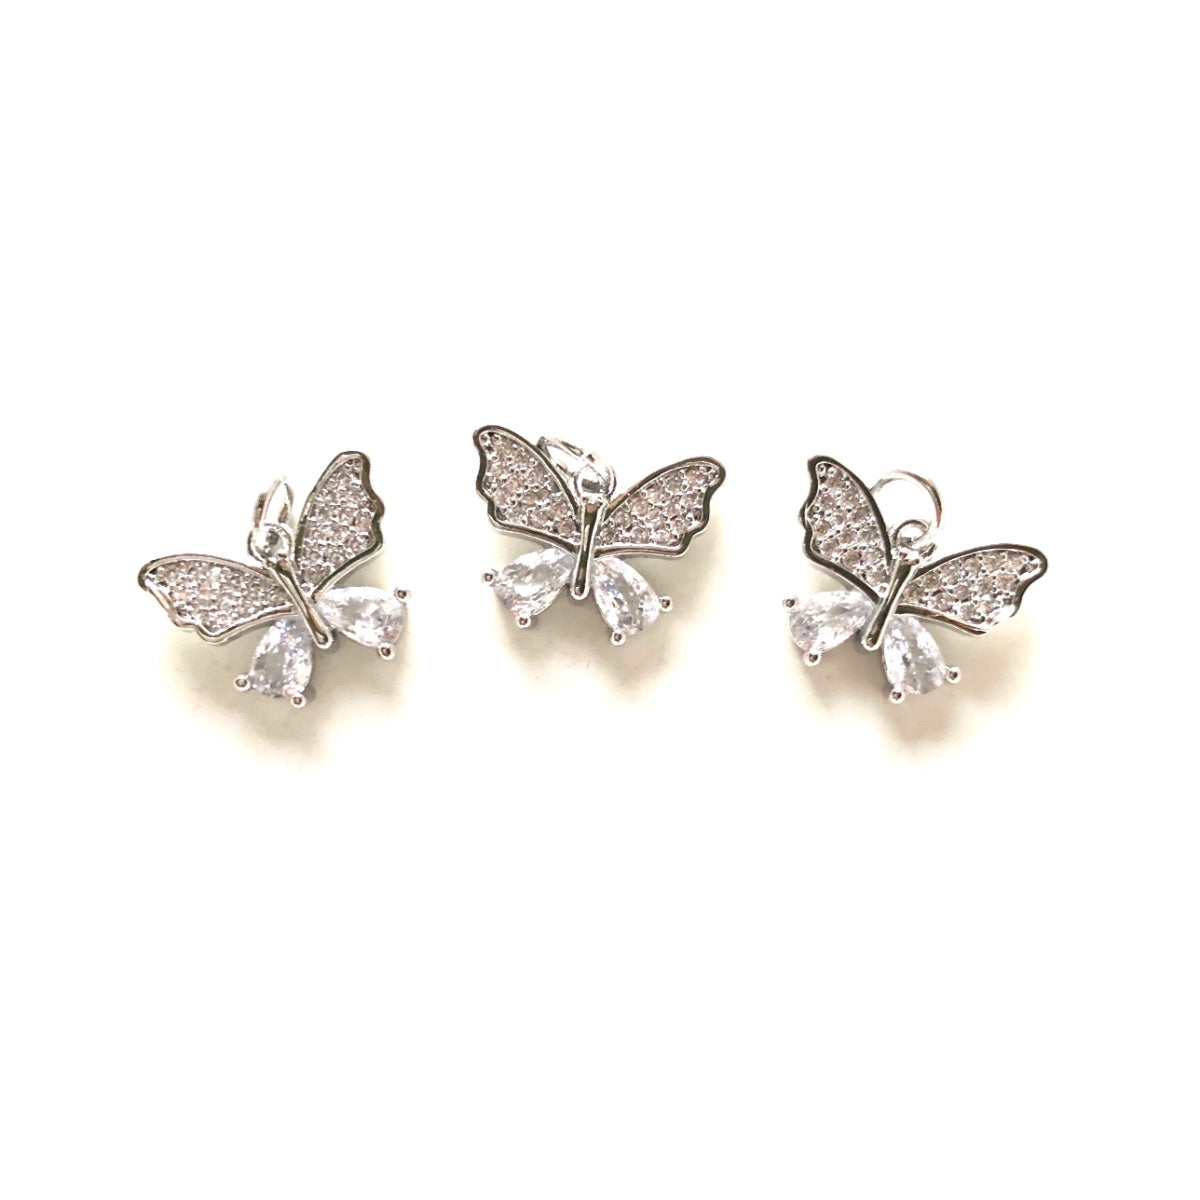 10pcs/lot 14*11mm Small Size CZ Pave Butterfly Charms Silver CZ Paved Charms Butterflies Small Sizes Charms Beads Beyond